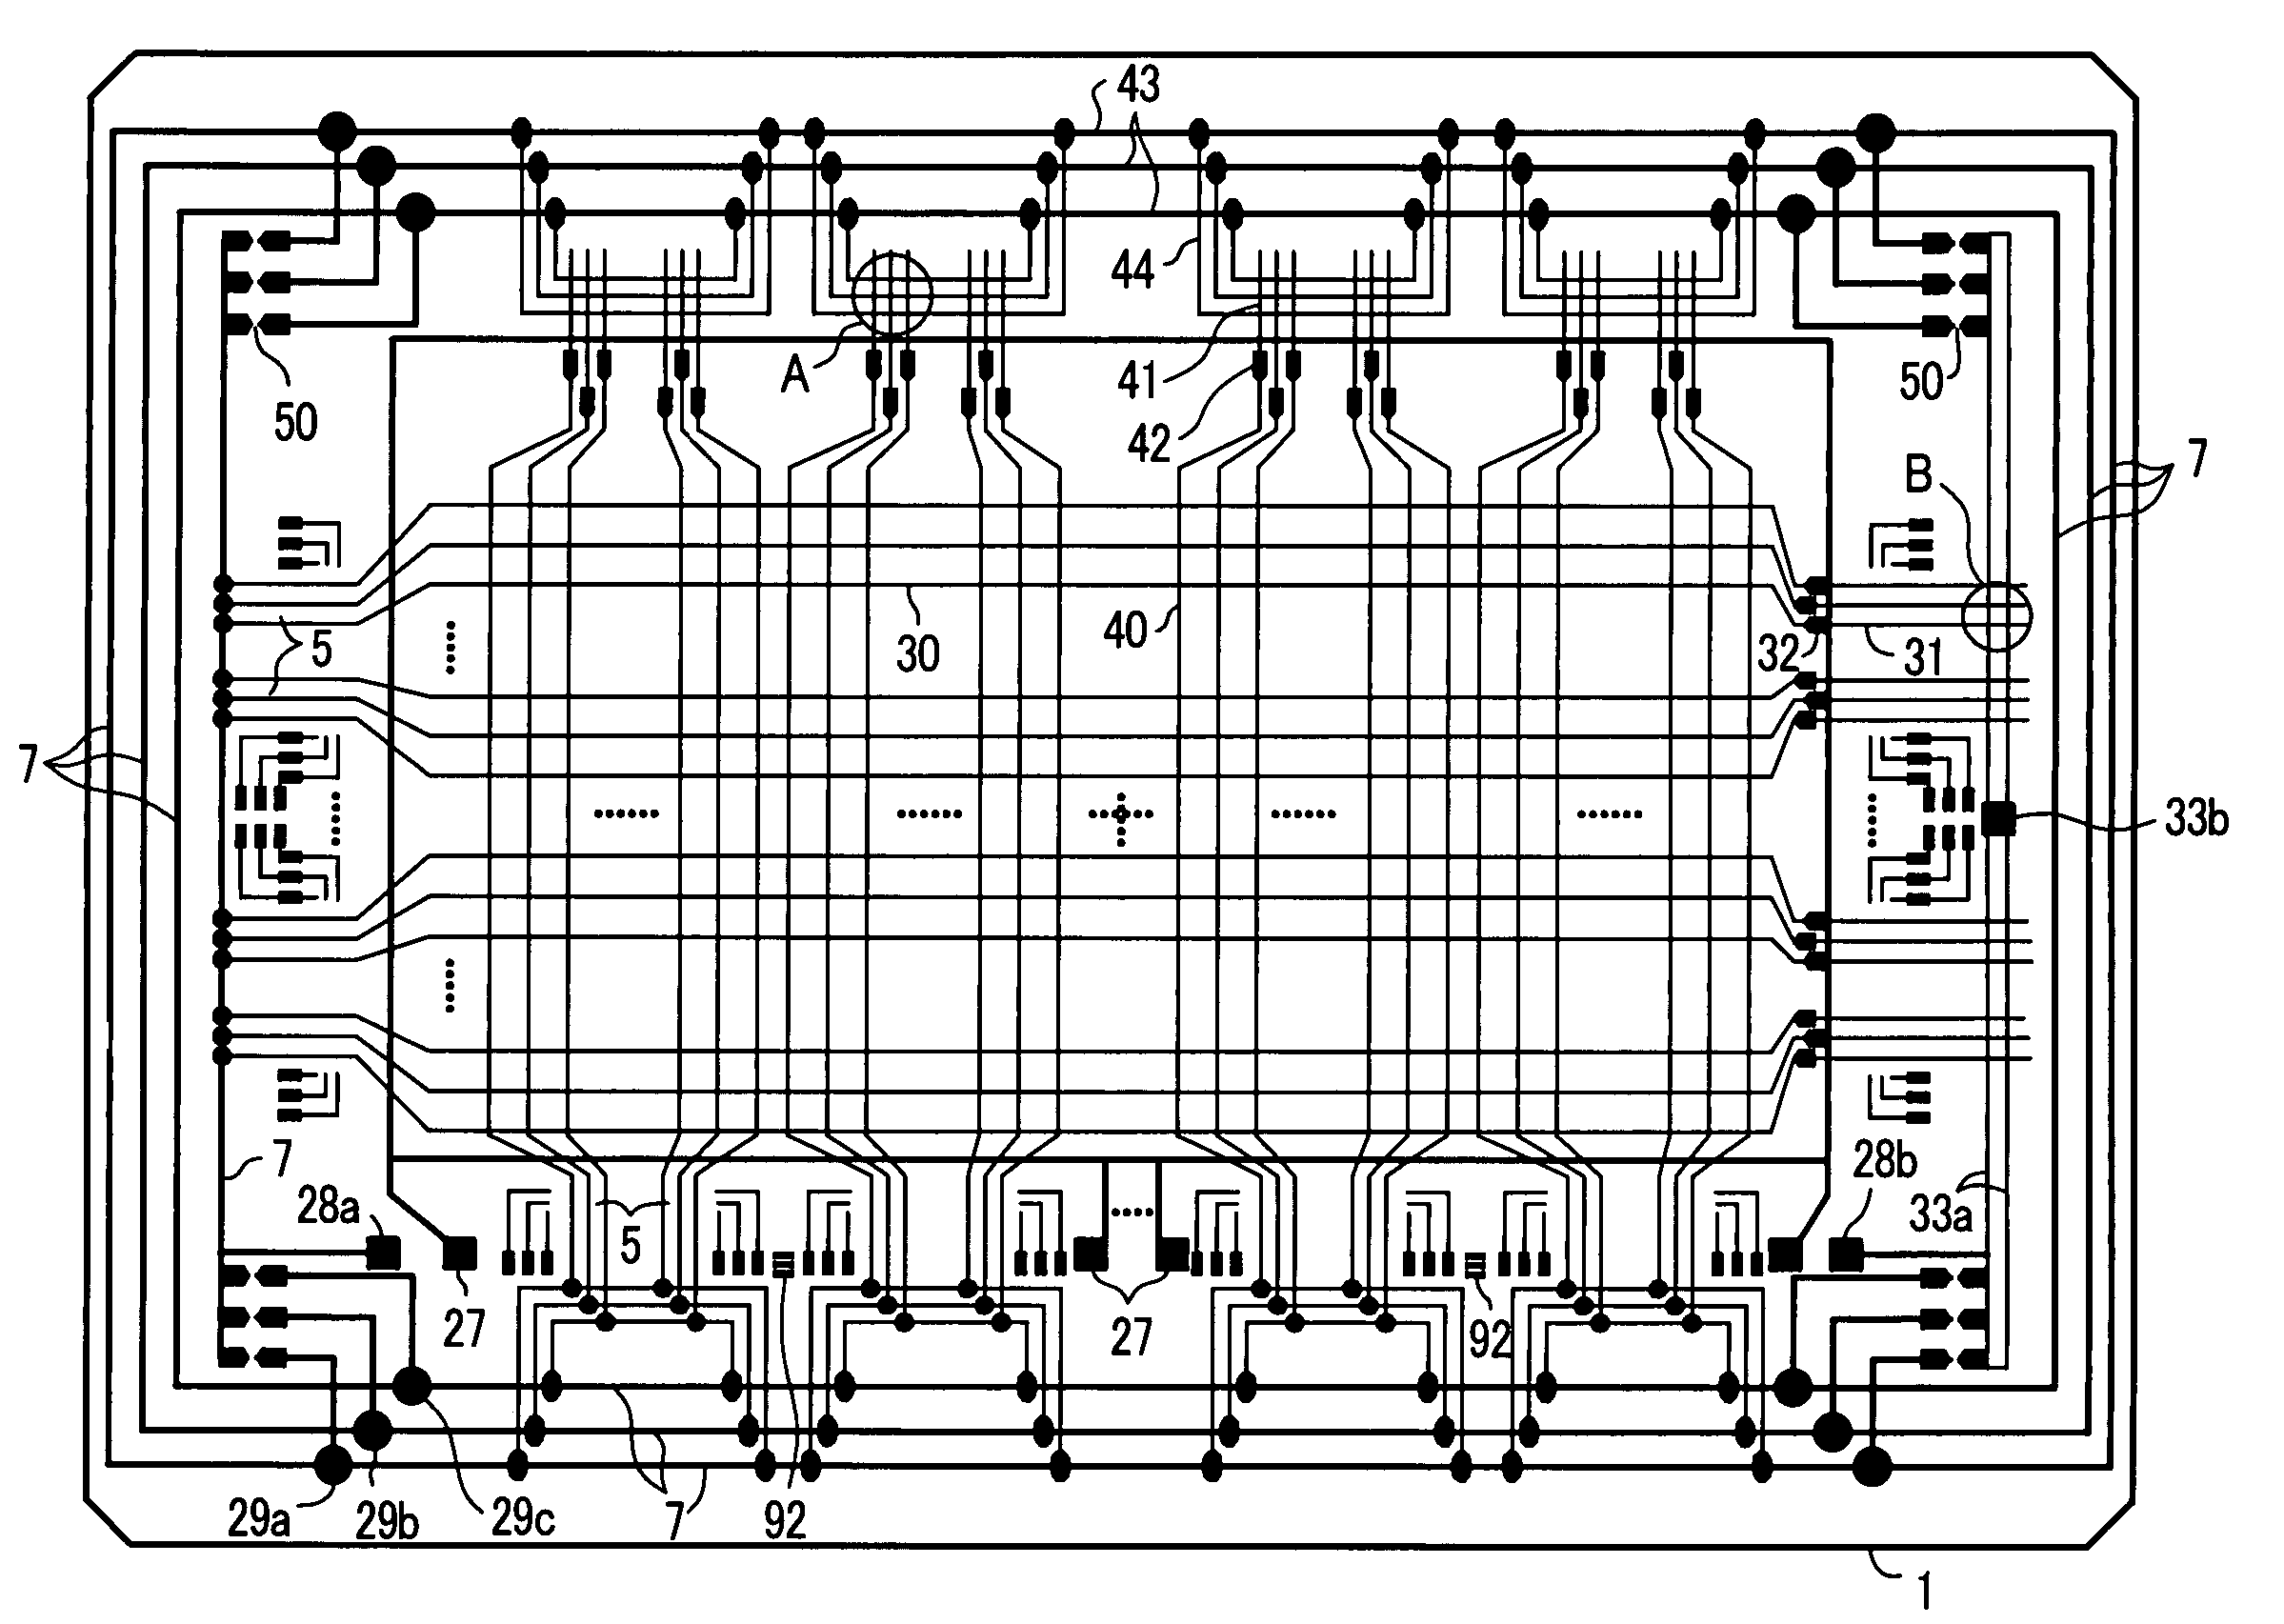 Active matrix type display device having antistatic lines used as repair lines